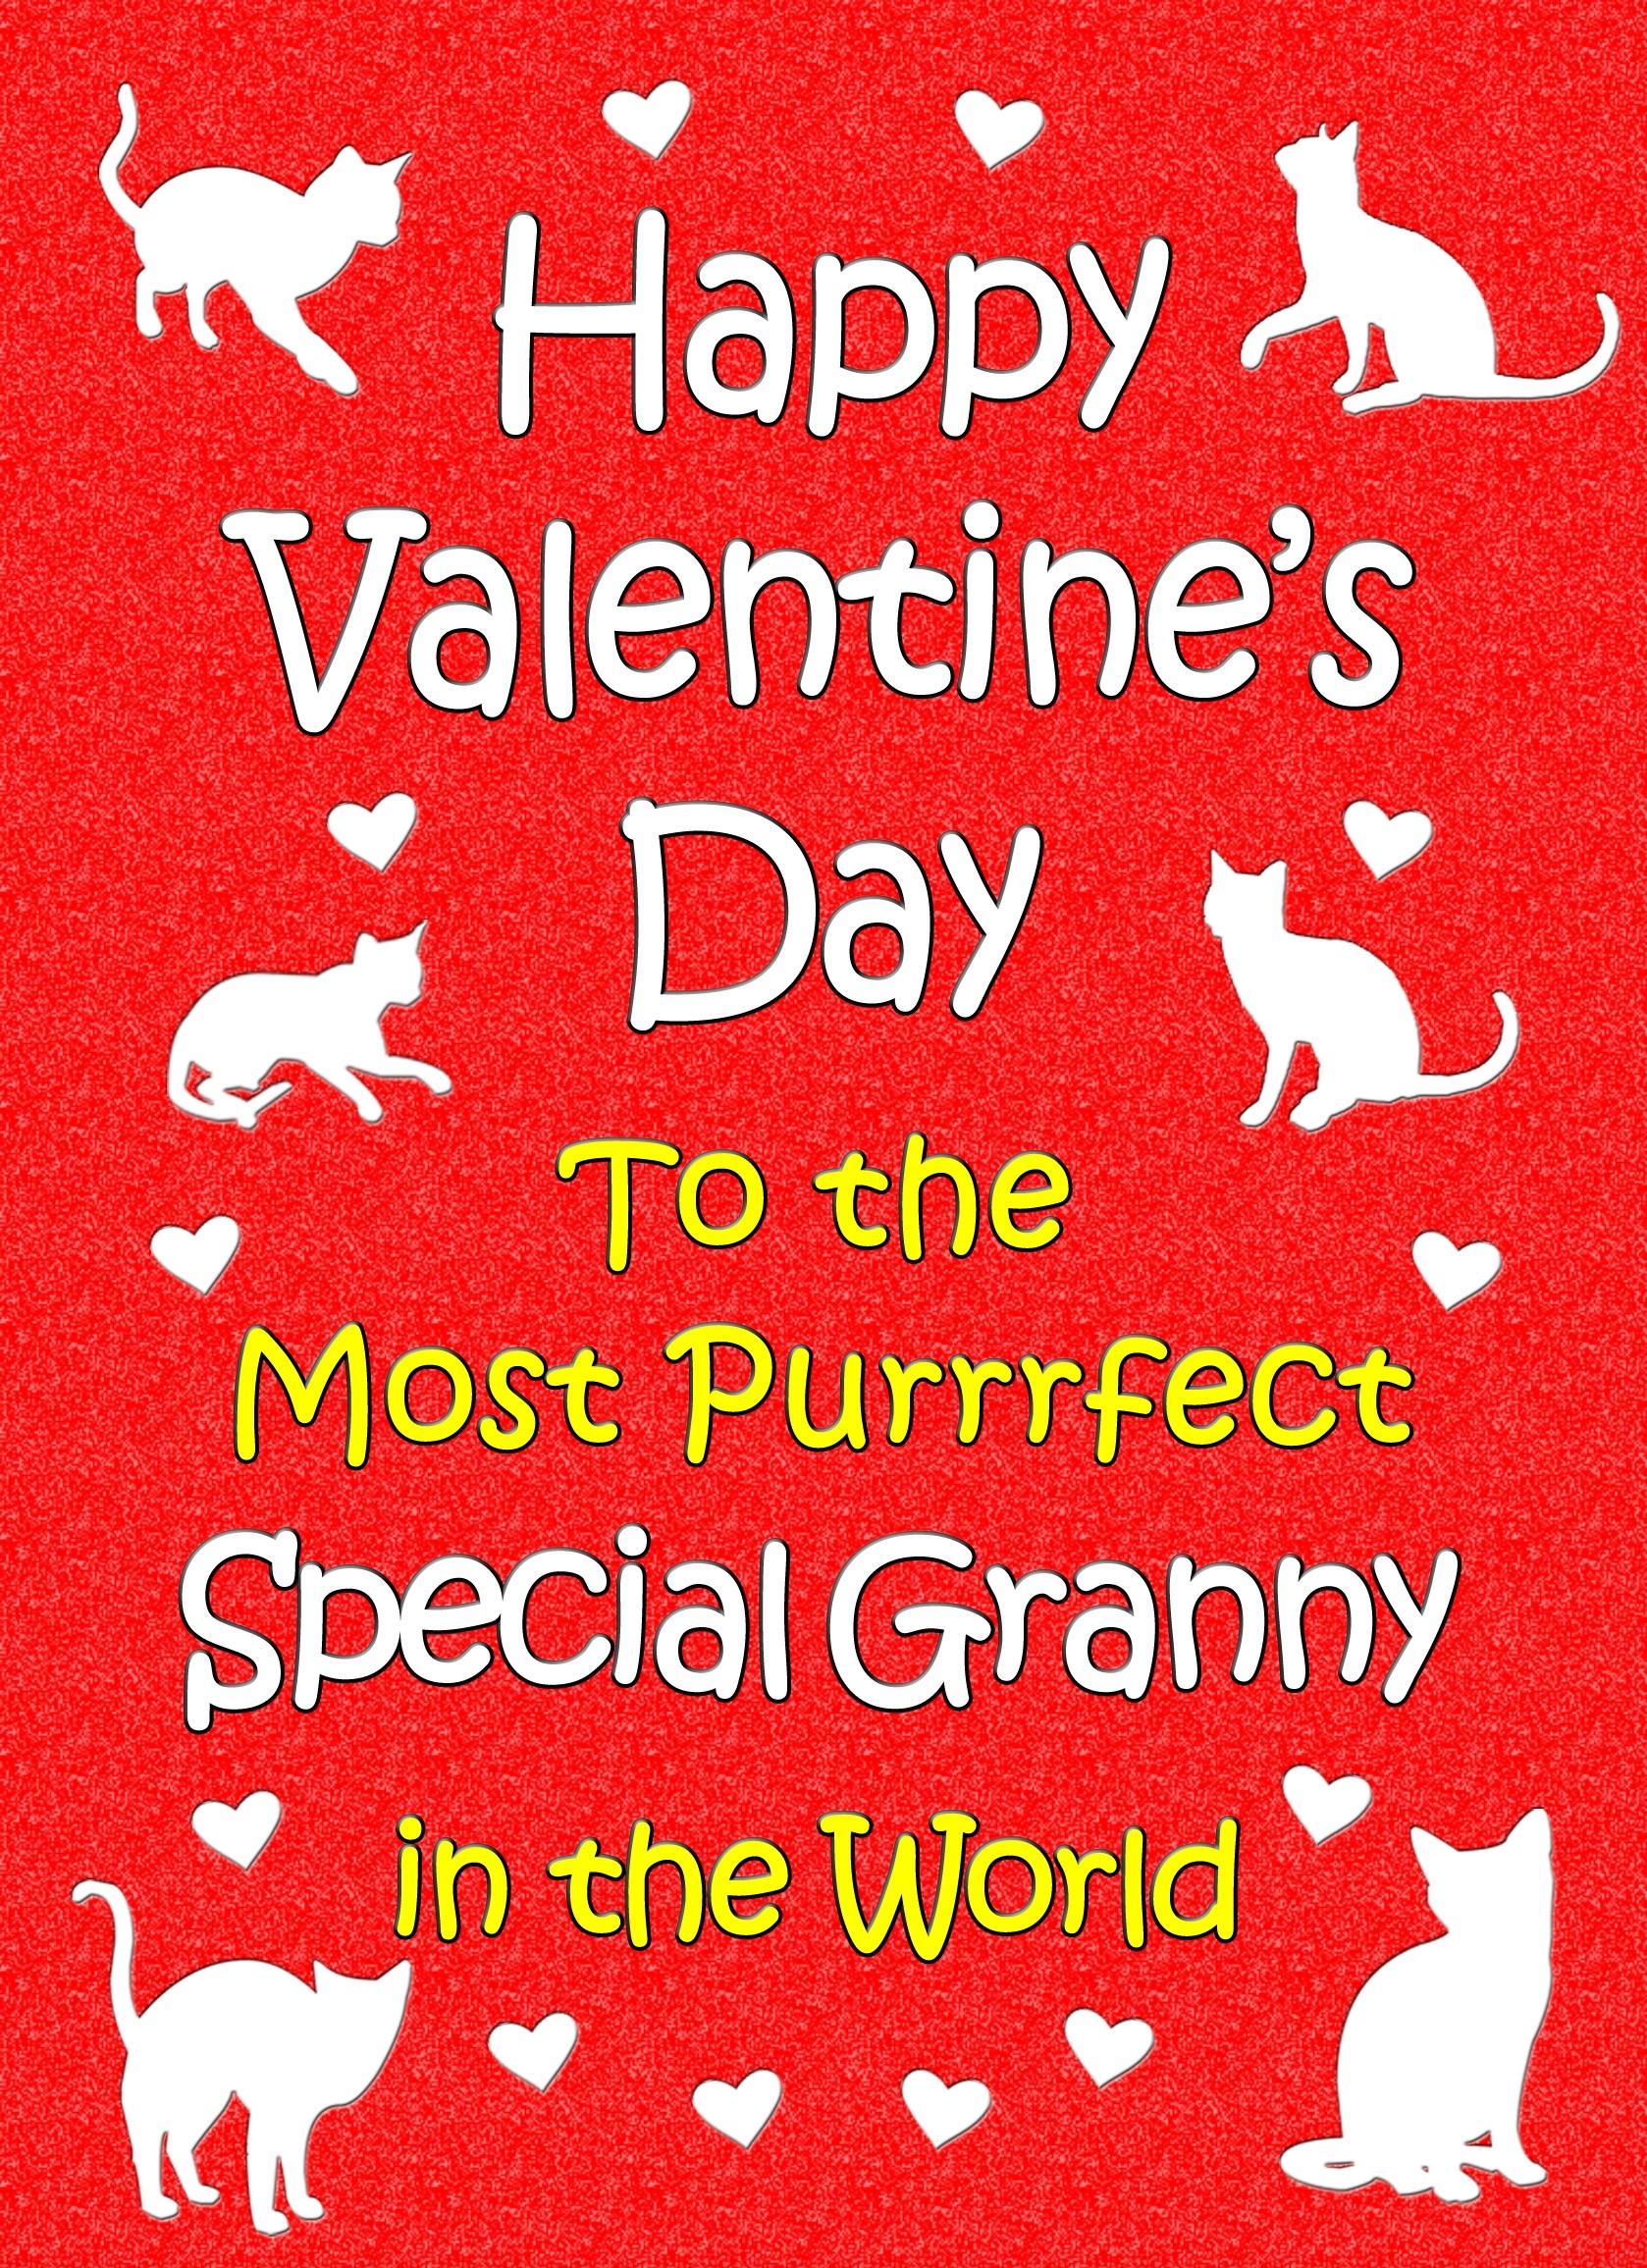 From The Cat Valentines Day Card (Special Granny)